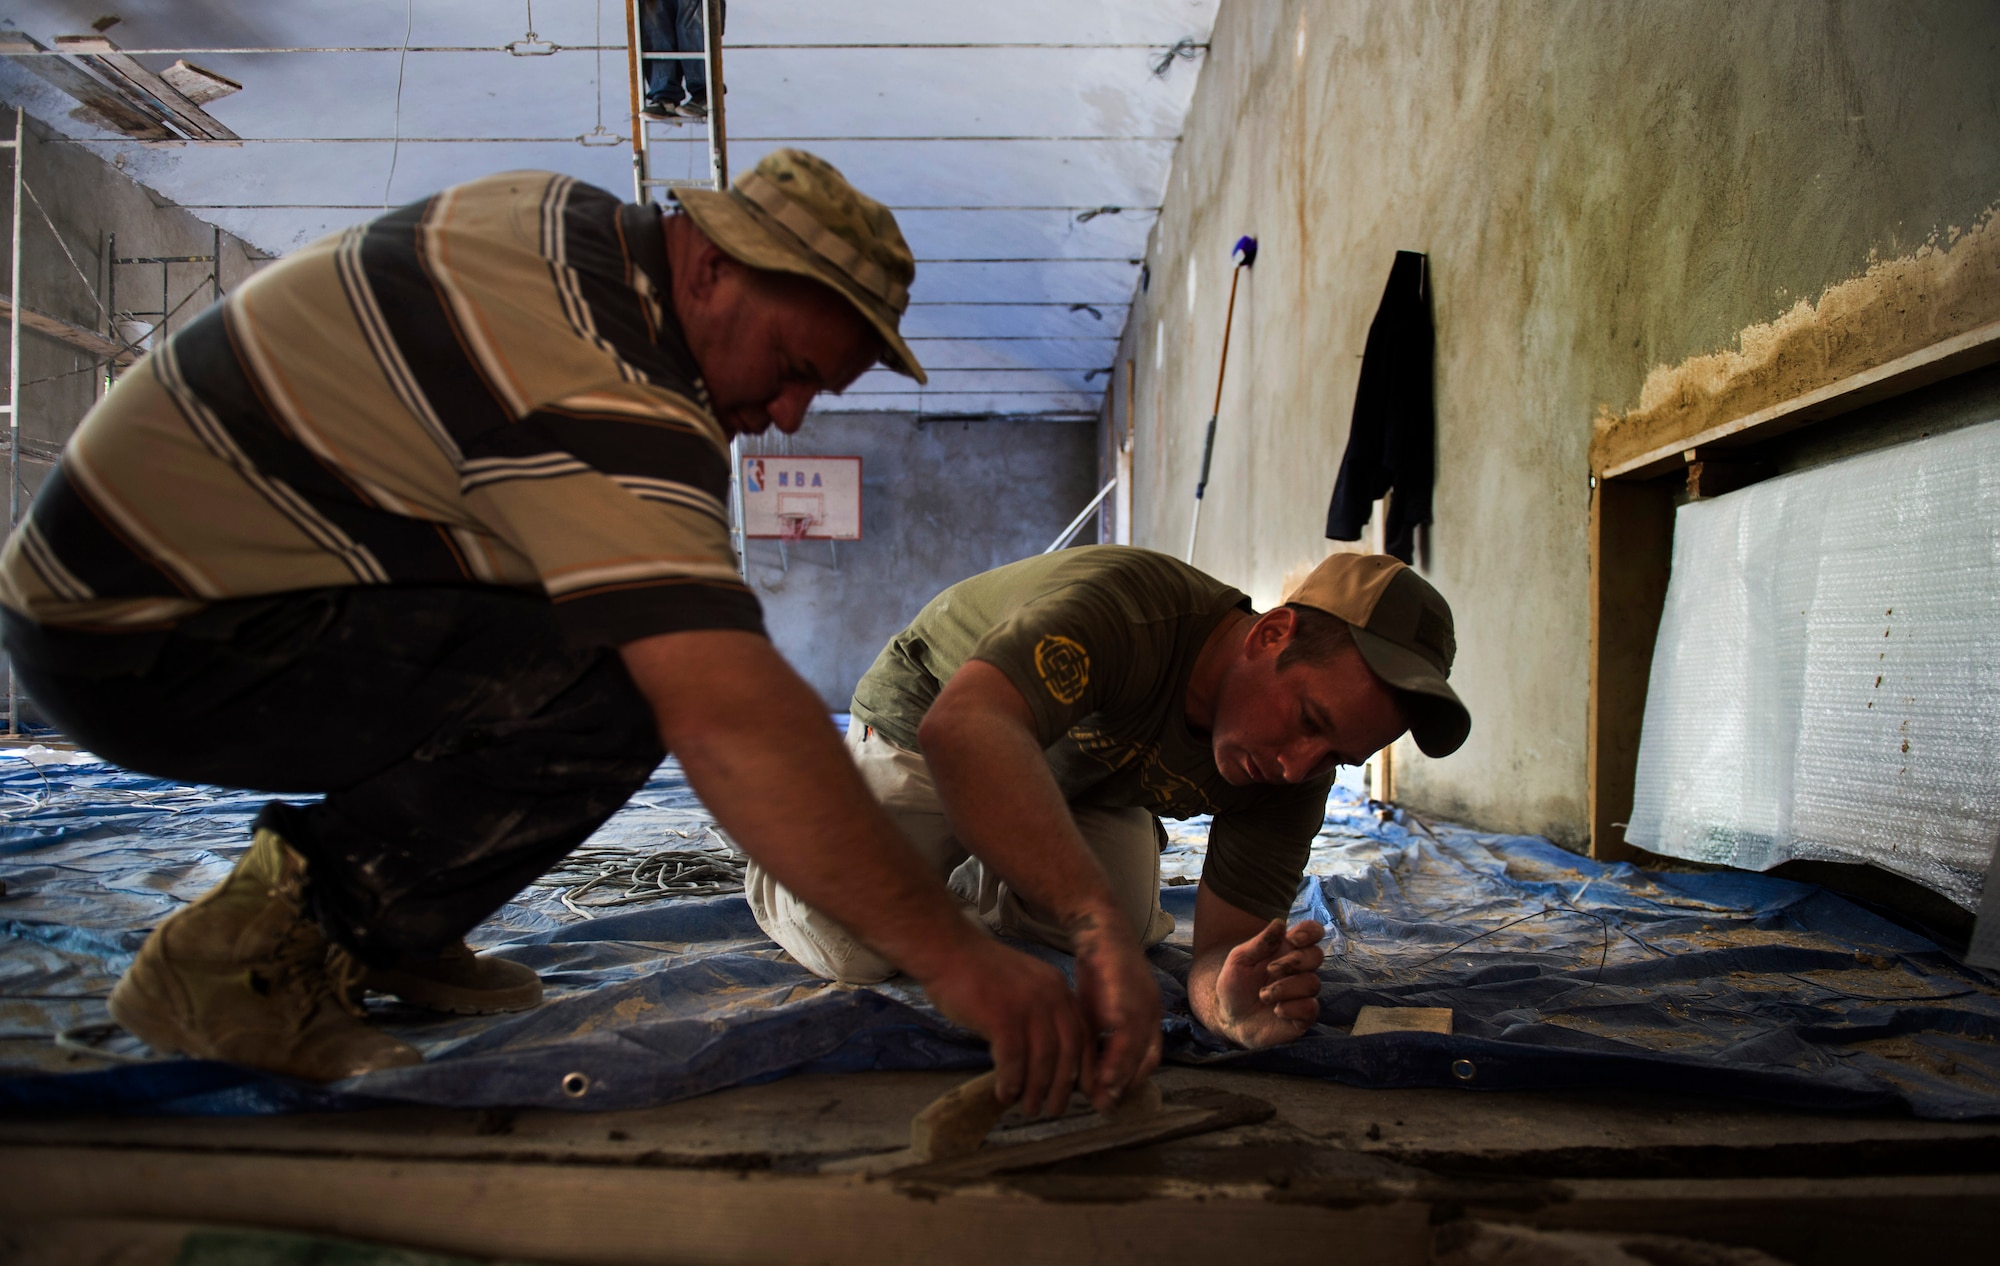 Staff Sgt. David Dengate, a 435th Construction and Training Squadron pavement and equipment operator, works with a Georgian army engineer to help fill in concrete in the entrance to the gymnasium of Public School No. 4 in Gori, Georgia, Aug. 27, 2015. Air Force and Georgian army engineers sometimes worked 16-hour days during a 30-day school renovation project that will help the children of Gori. Humanitarian and civic assistance projects enhance operational readiness of military personnel while providing mutual support to the host nation's population. (U.S. Air Force photo/Staff Sgt. Sara Keller) 